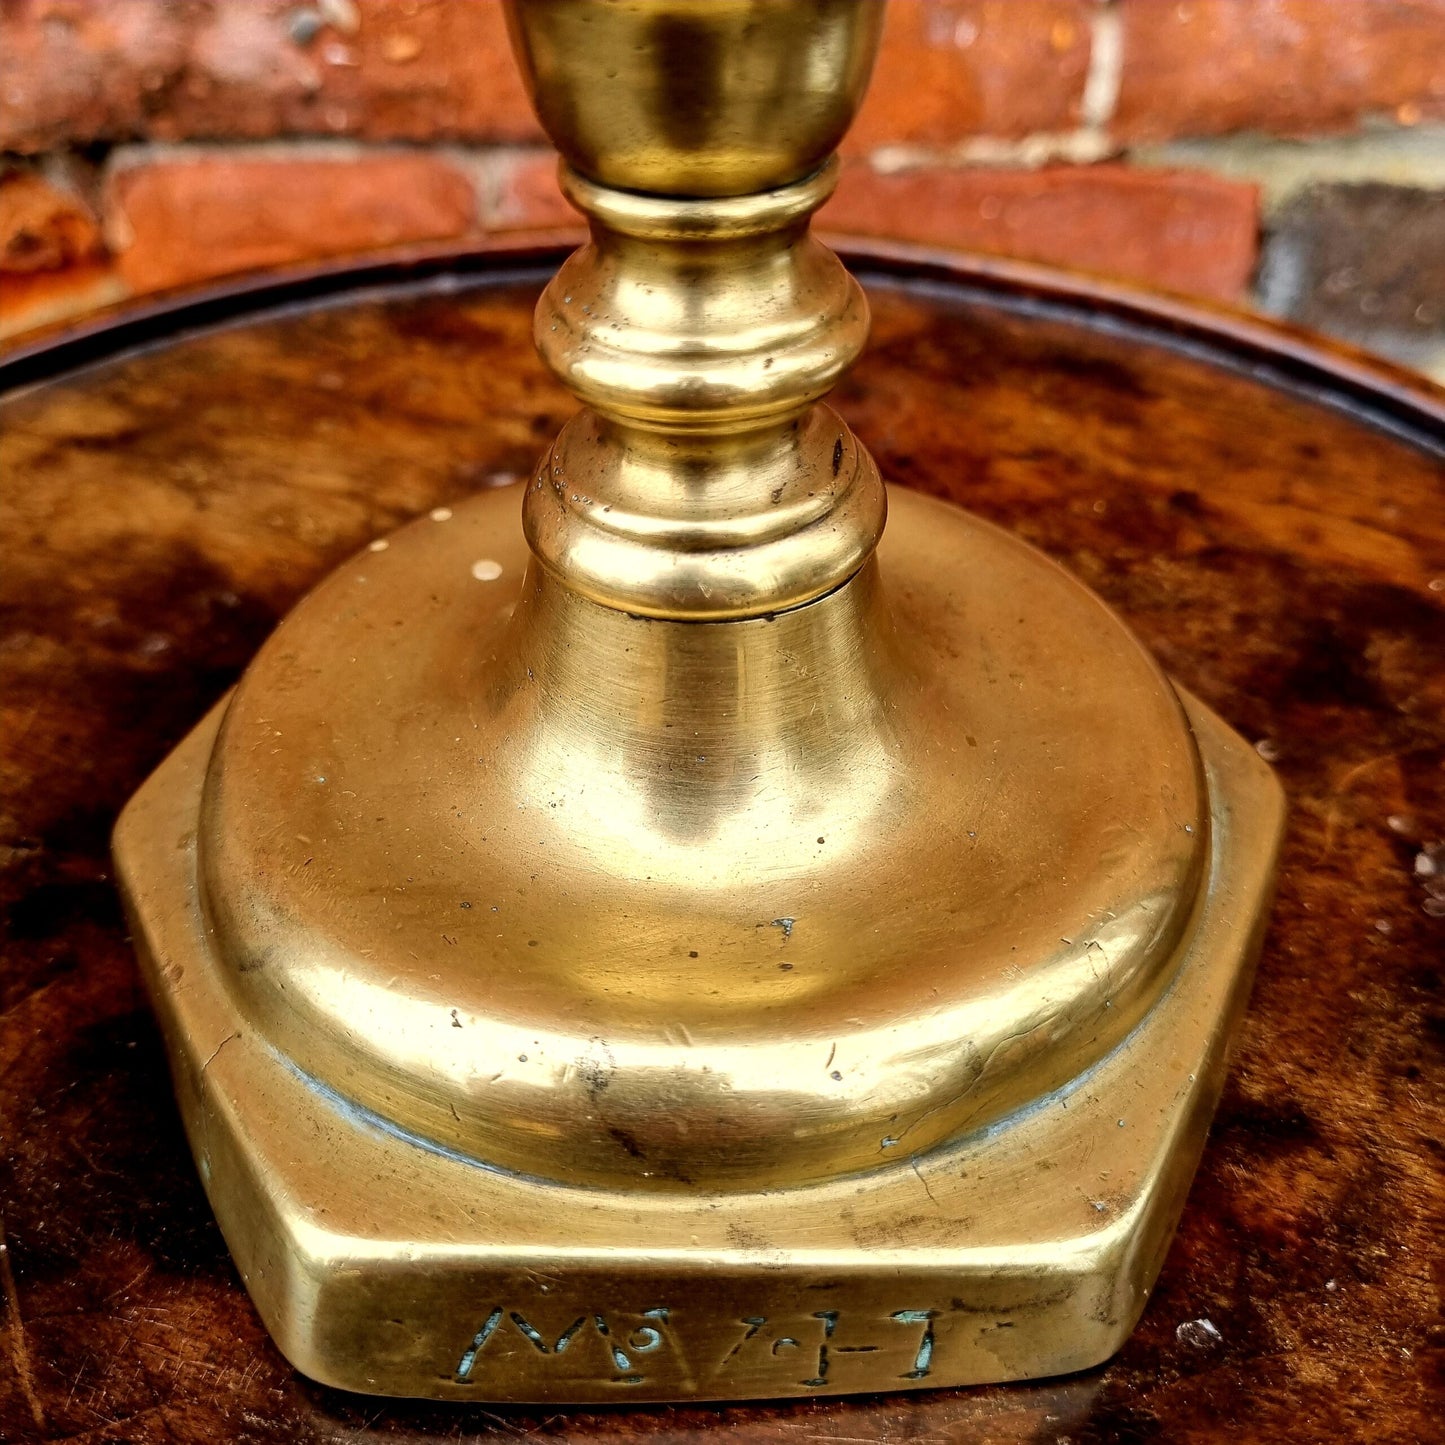 17th Century French Antique Brass Candlestick, circa 1680, bearing the initials "MVH"